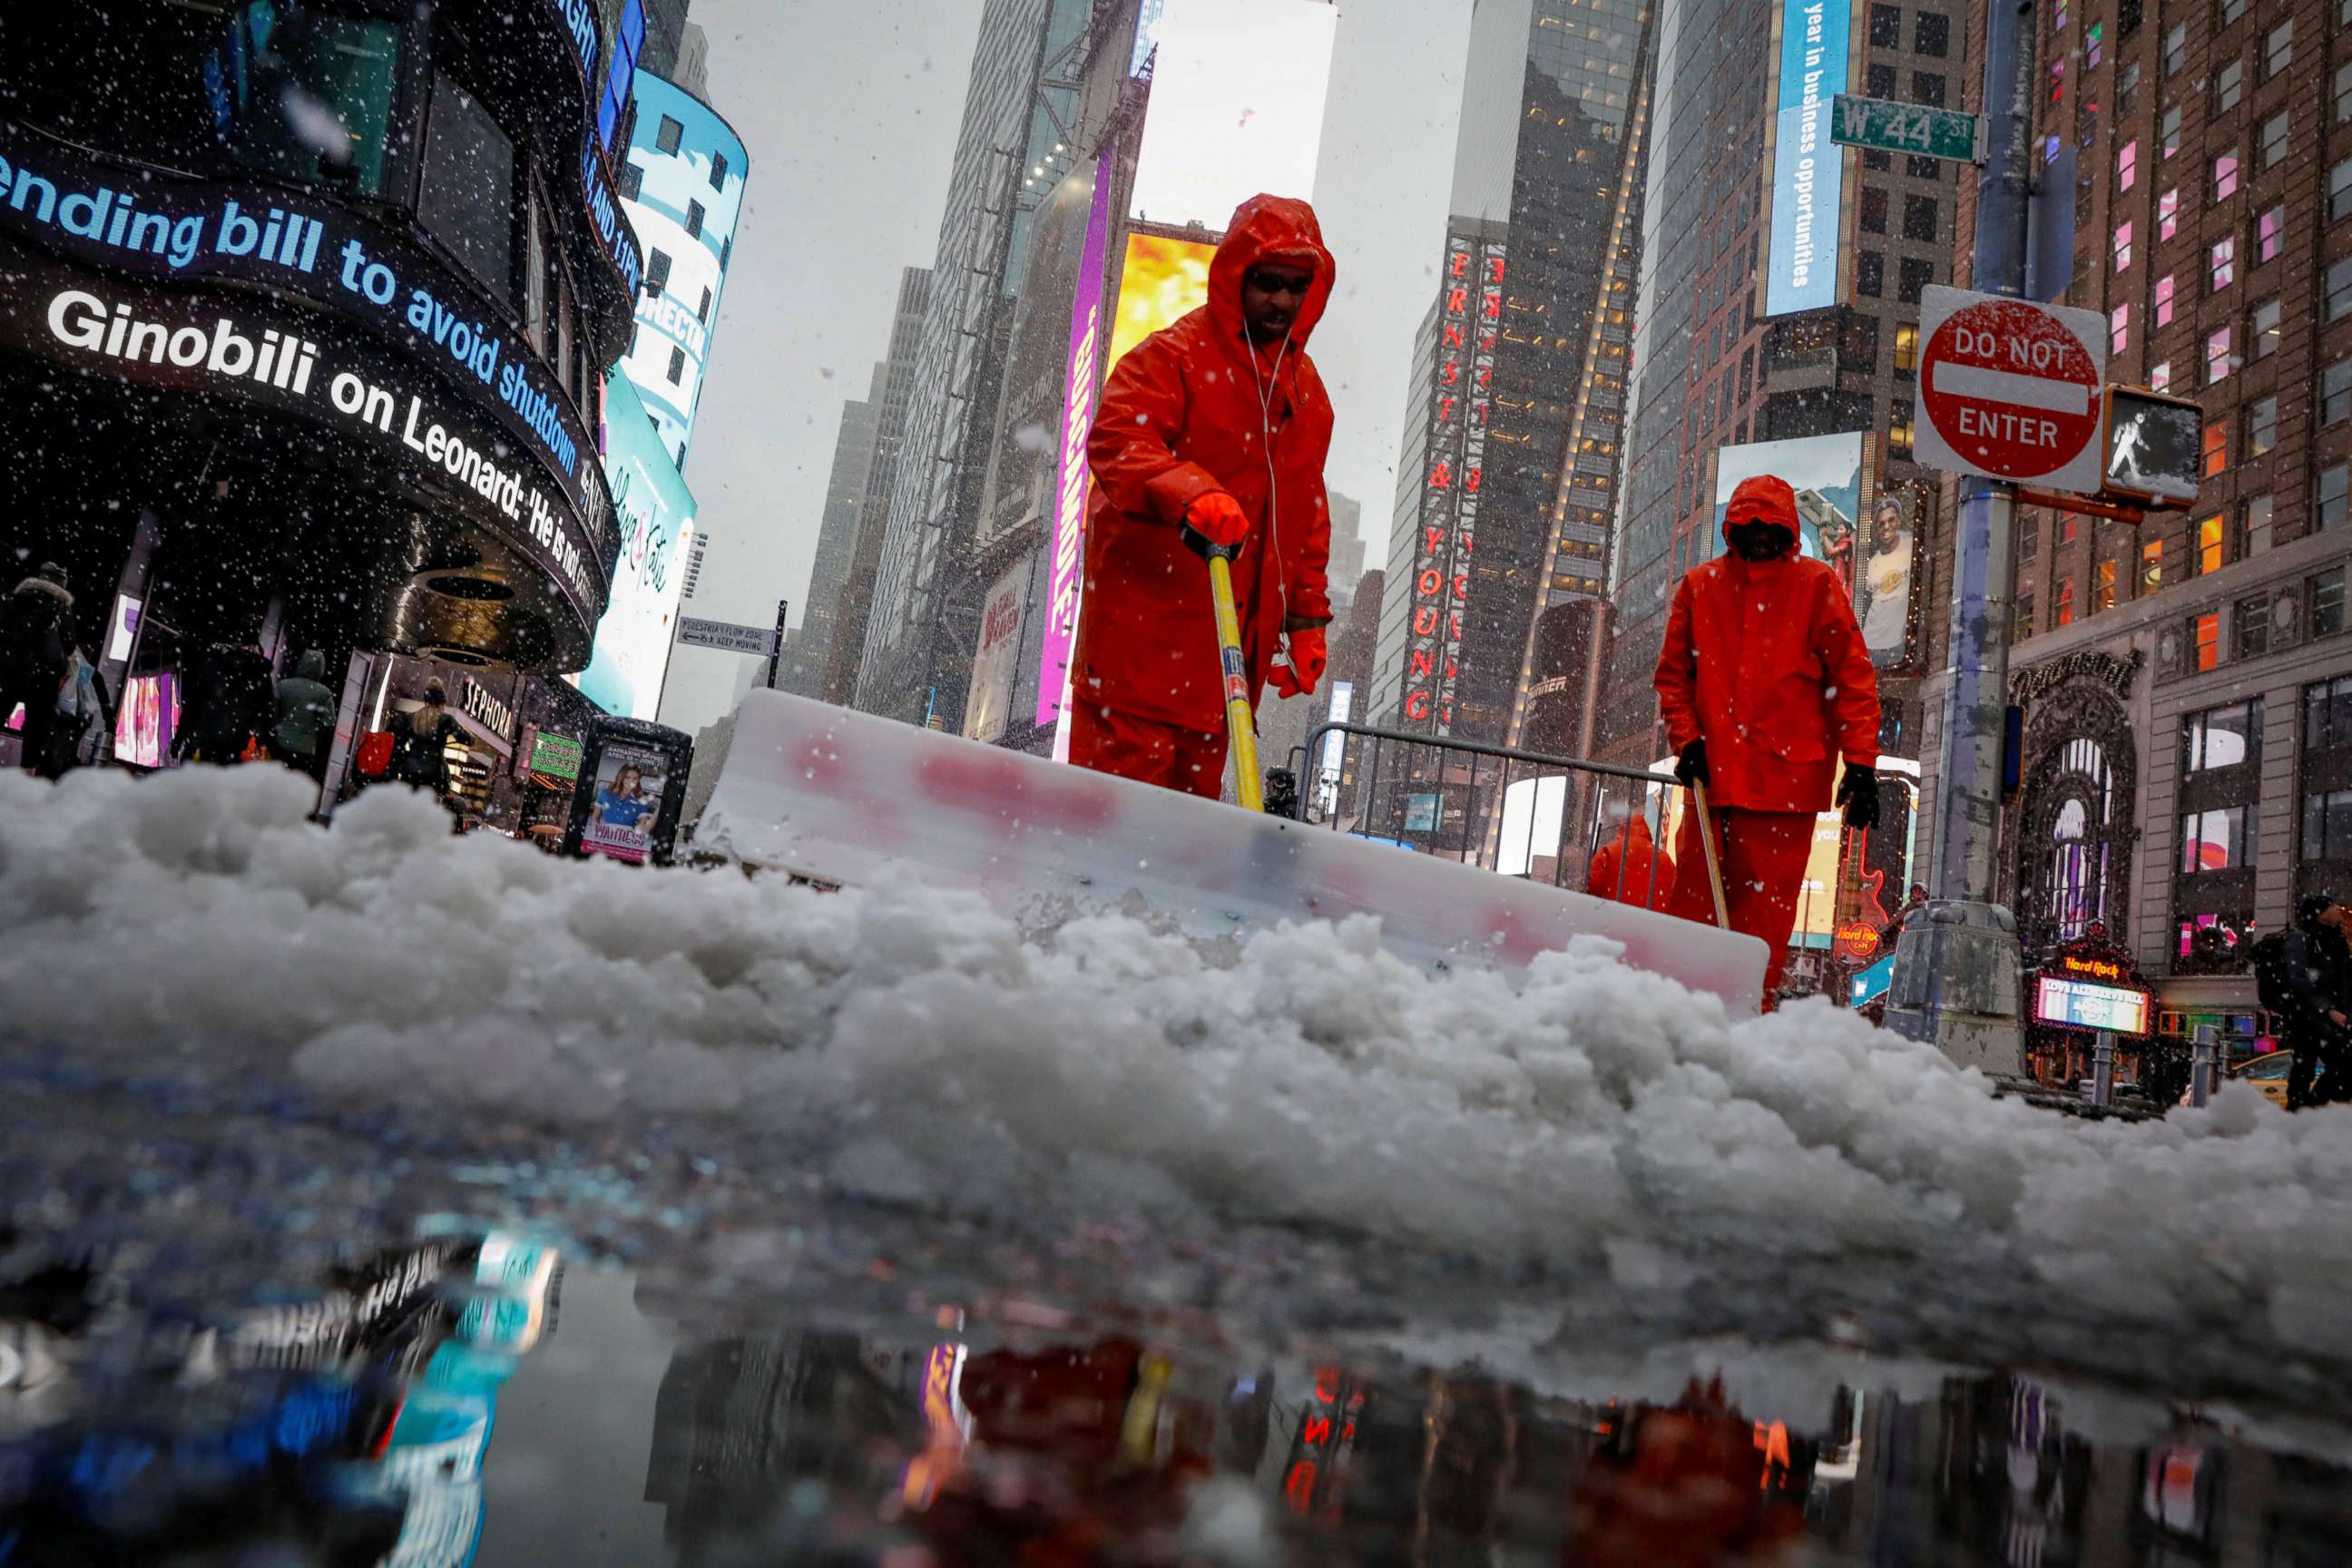 PHOTO: Workers clear snow during a winter nor'easter storm in Times Square in New York City, March 21, 2018.